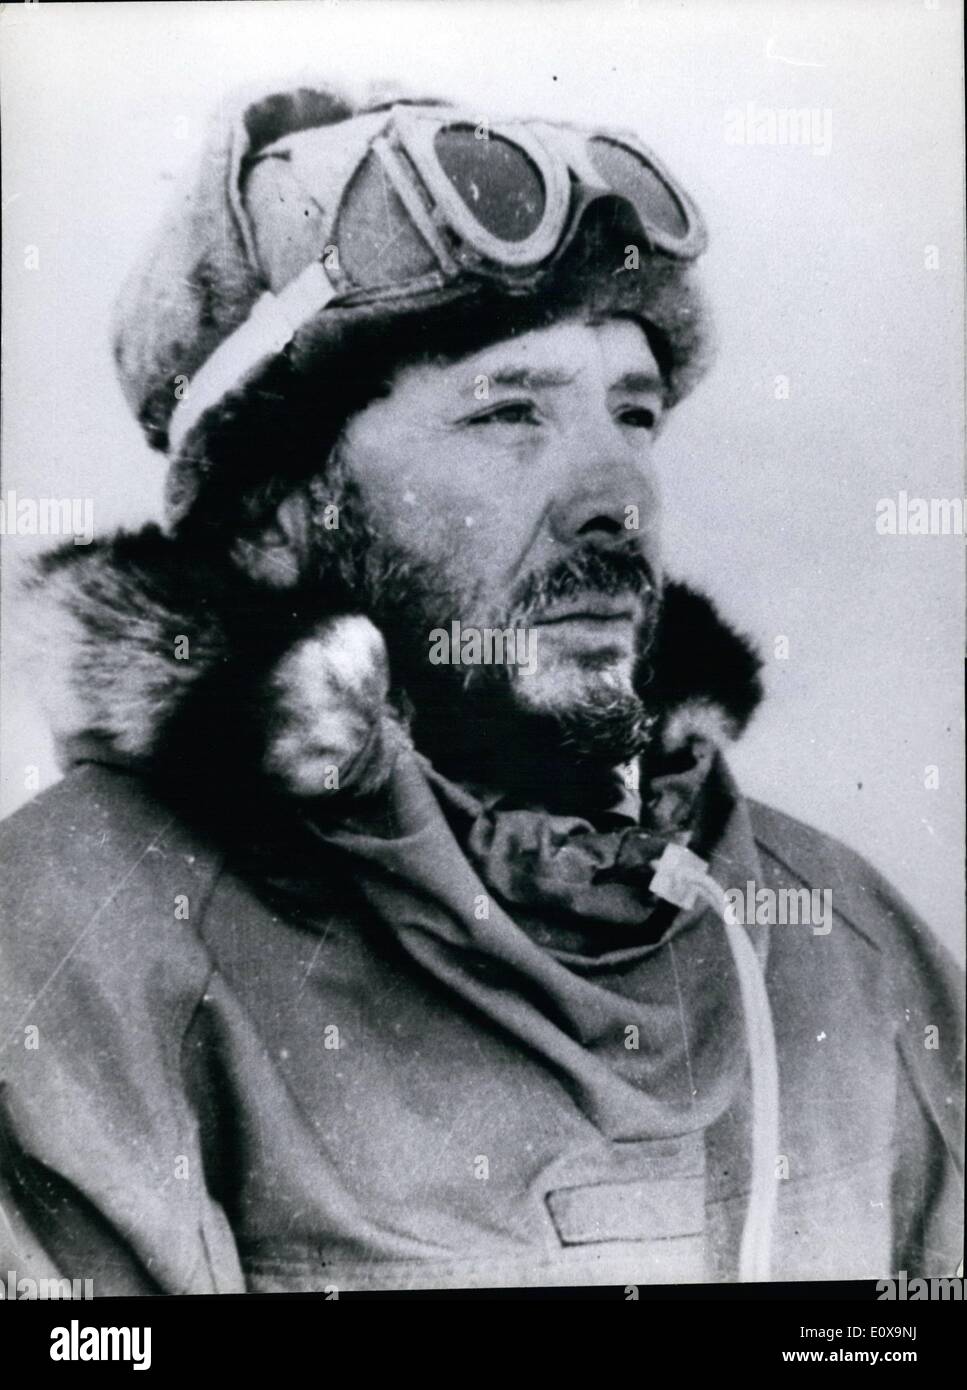 Dec. 12, 1965 - After marching 46 hard days through the icy grounds of the Antartic, an Argentine military expidition lead by Col. Jorge Edgar Leal reached the South Pole on December 10,1965. Col. Leal and his group left the Argentine base on the Weddell sea ''General Belgramo'' on October 26 and marched 1110 kilometers fighting their way under worst weather conditions, to reach the South Pole as the fourth nation achieving this goal Stock Photo